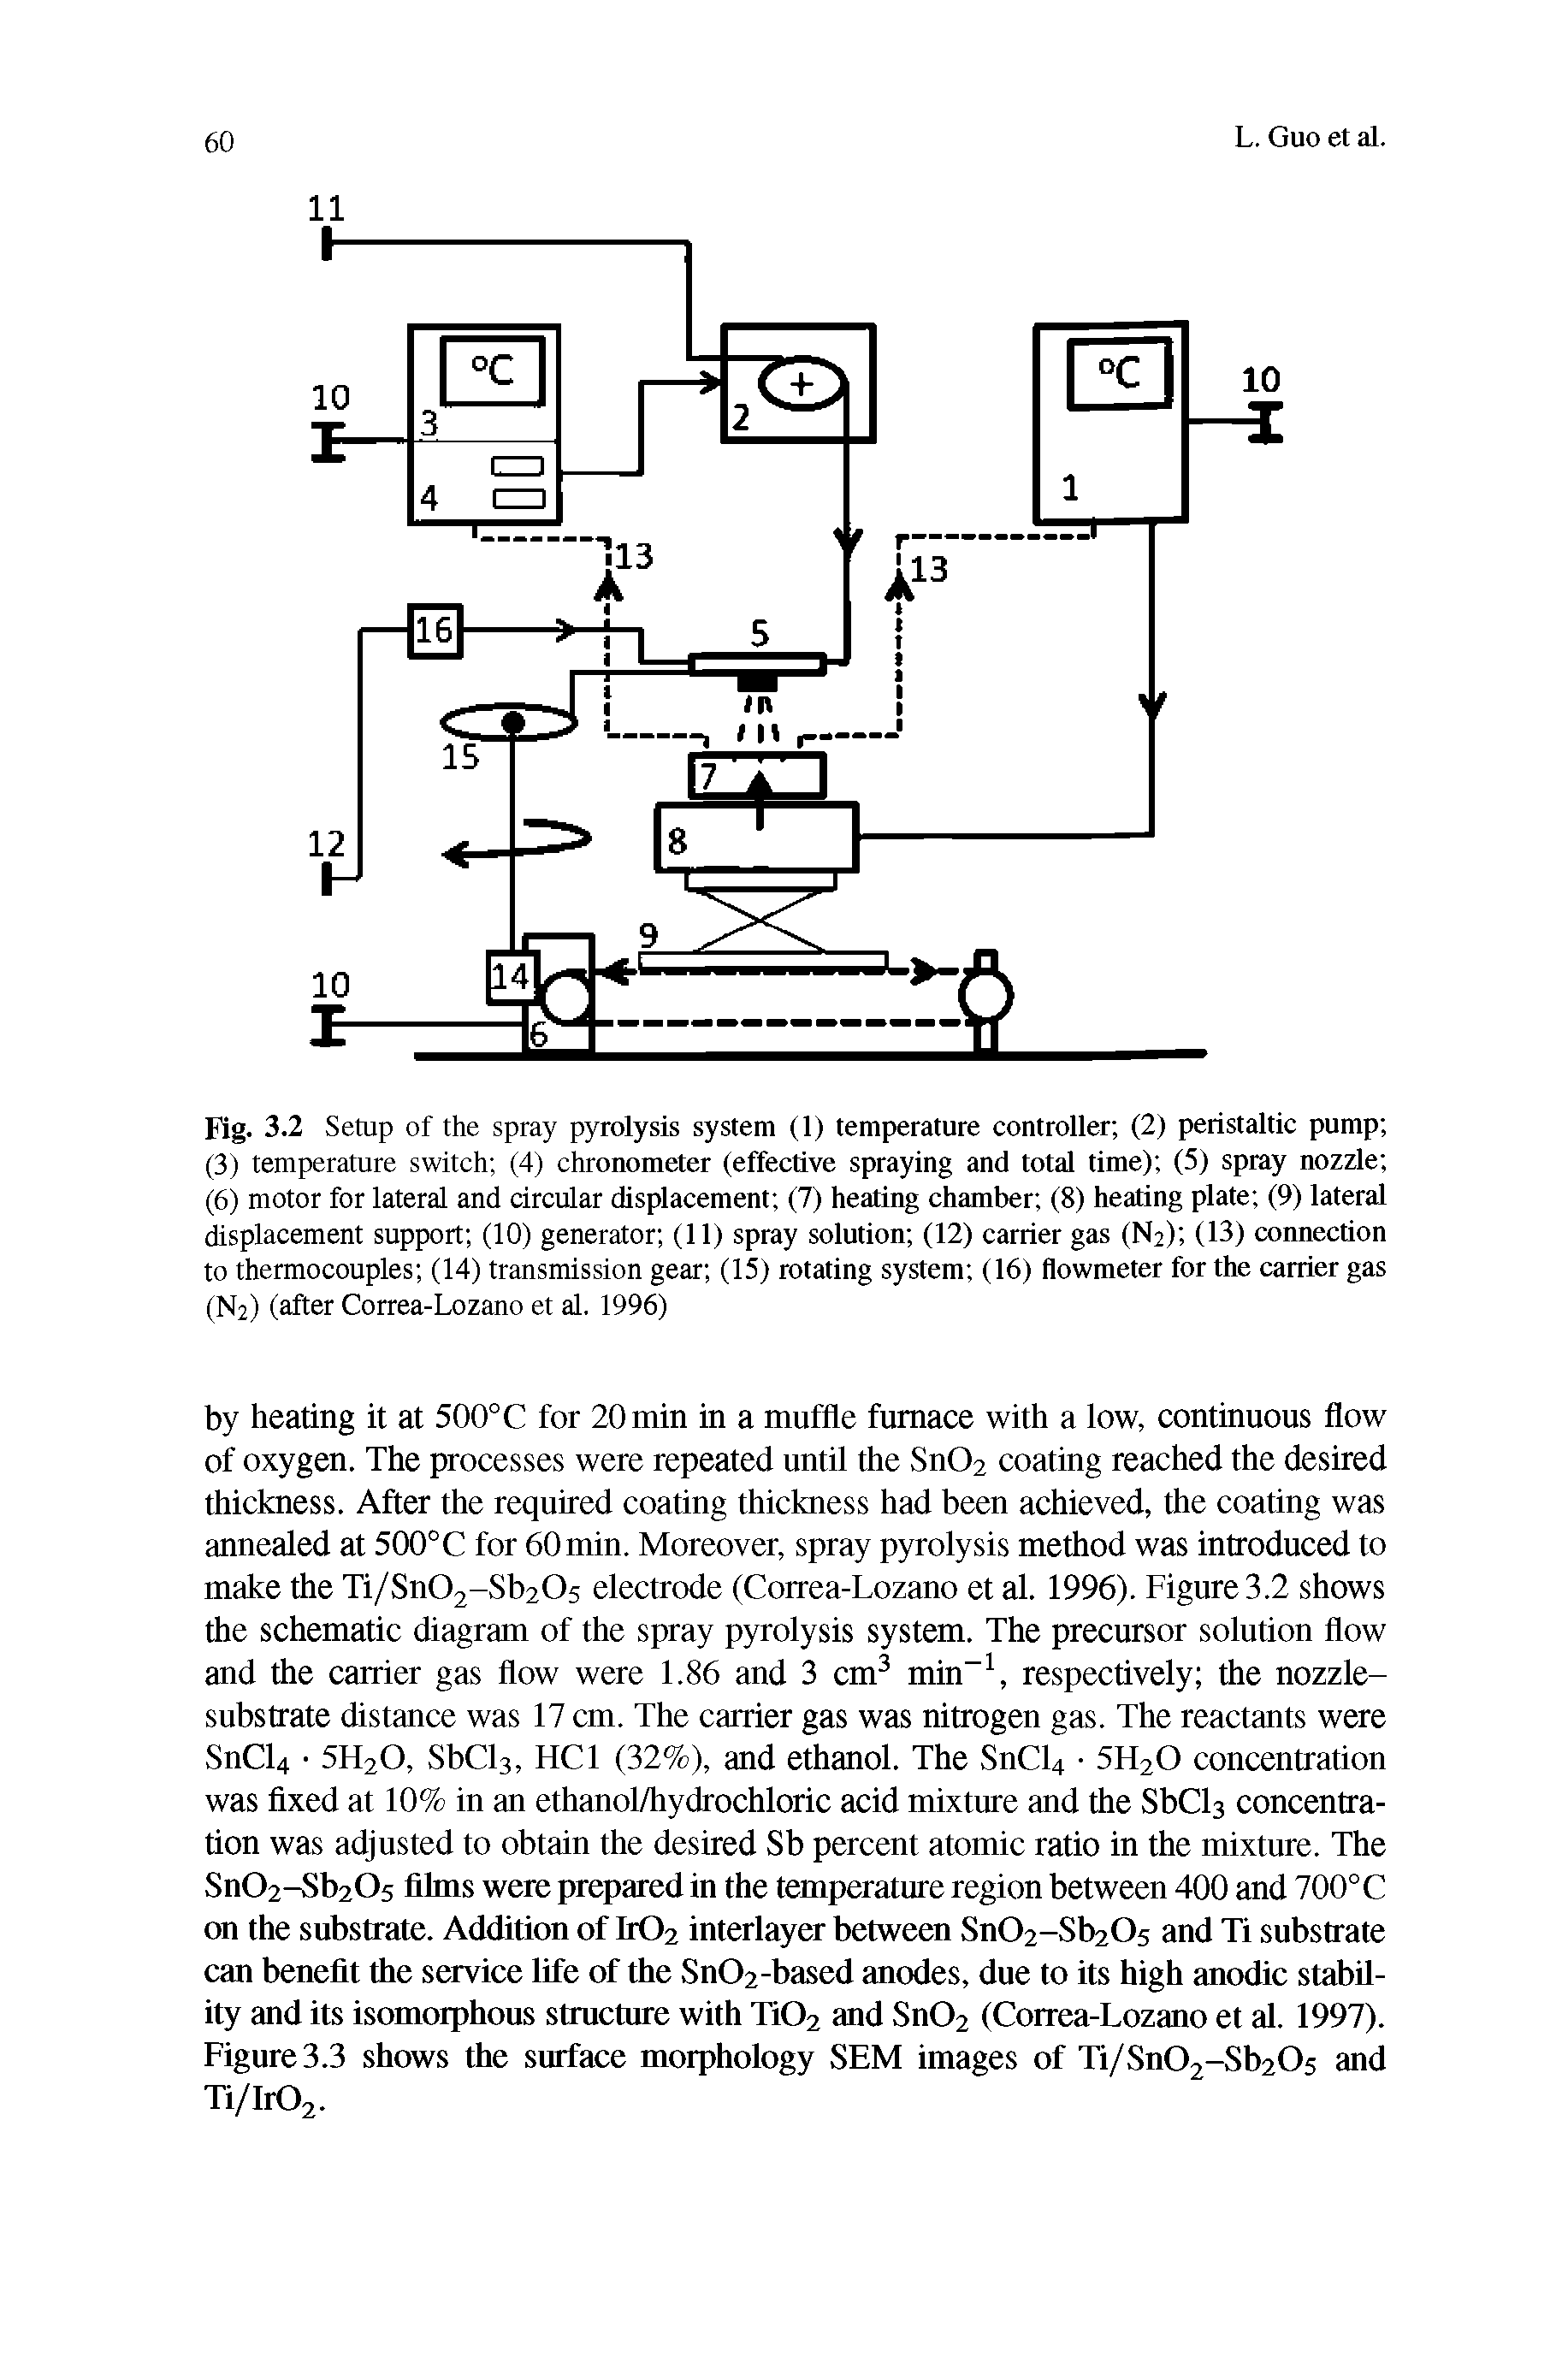 Fig. 3.2 Setup of the spray pyrolysis system (1) temperature controller (2) peristaltic pump (3) temperature switch (4) chronometer (effective spraying and total time) (5) spray nozzle (6) motor for lateral and circular displacement (7) heating chamber (8) heating plate (9) lateral displacement support (10) generator (11) spray solution (12) carrier gas (N2) (13) connection to thermocouples (14) transmission gear (15) rotating system (16) flowmeter for the carrier gas (N2) (after Correa-Lozano et al. 1996)...